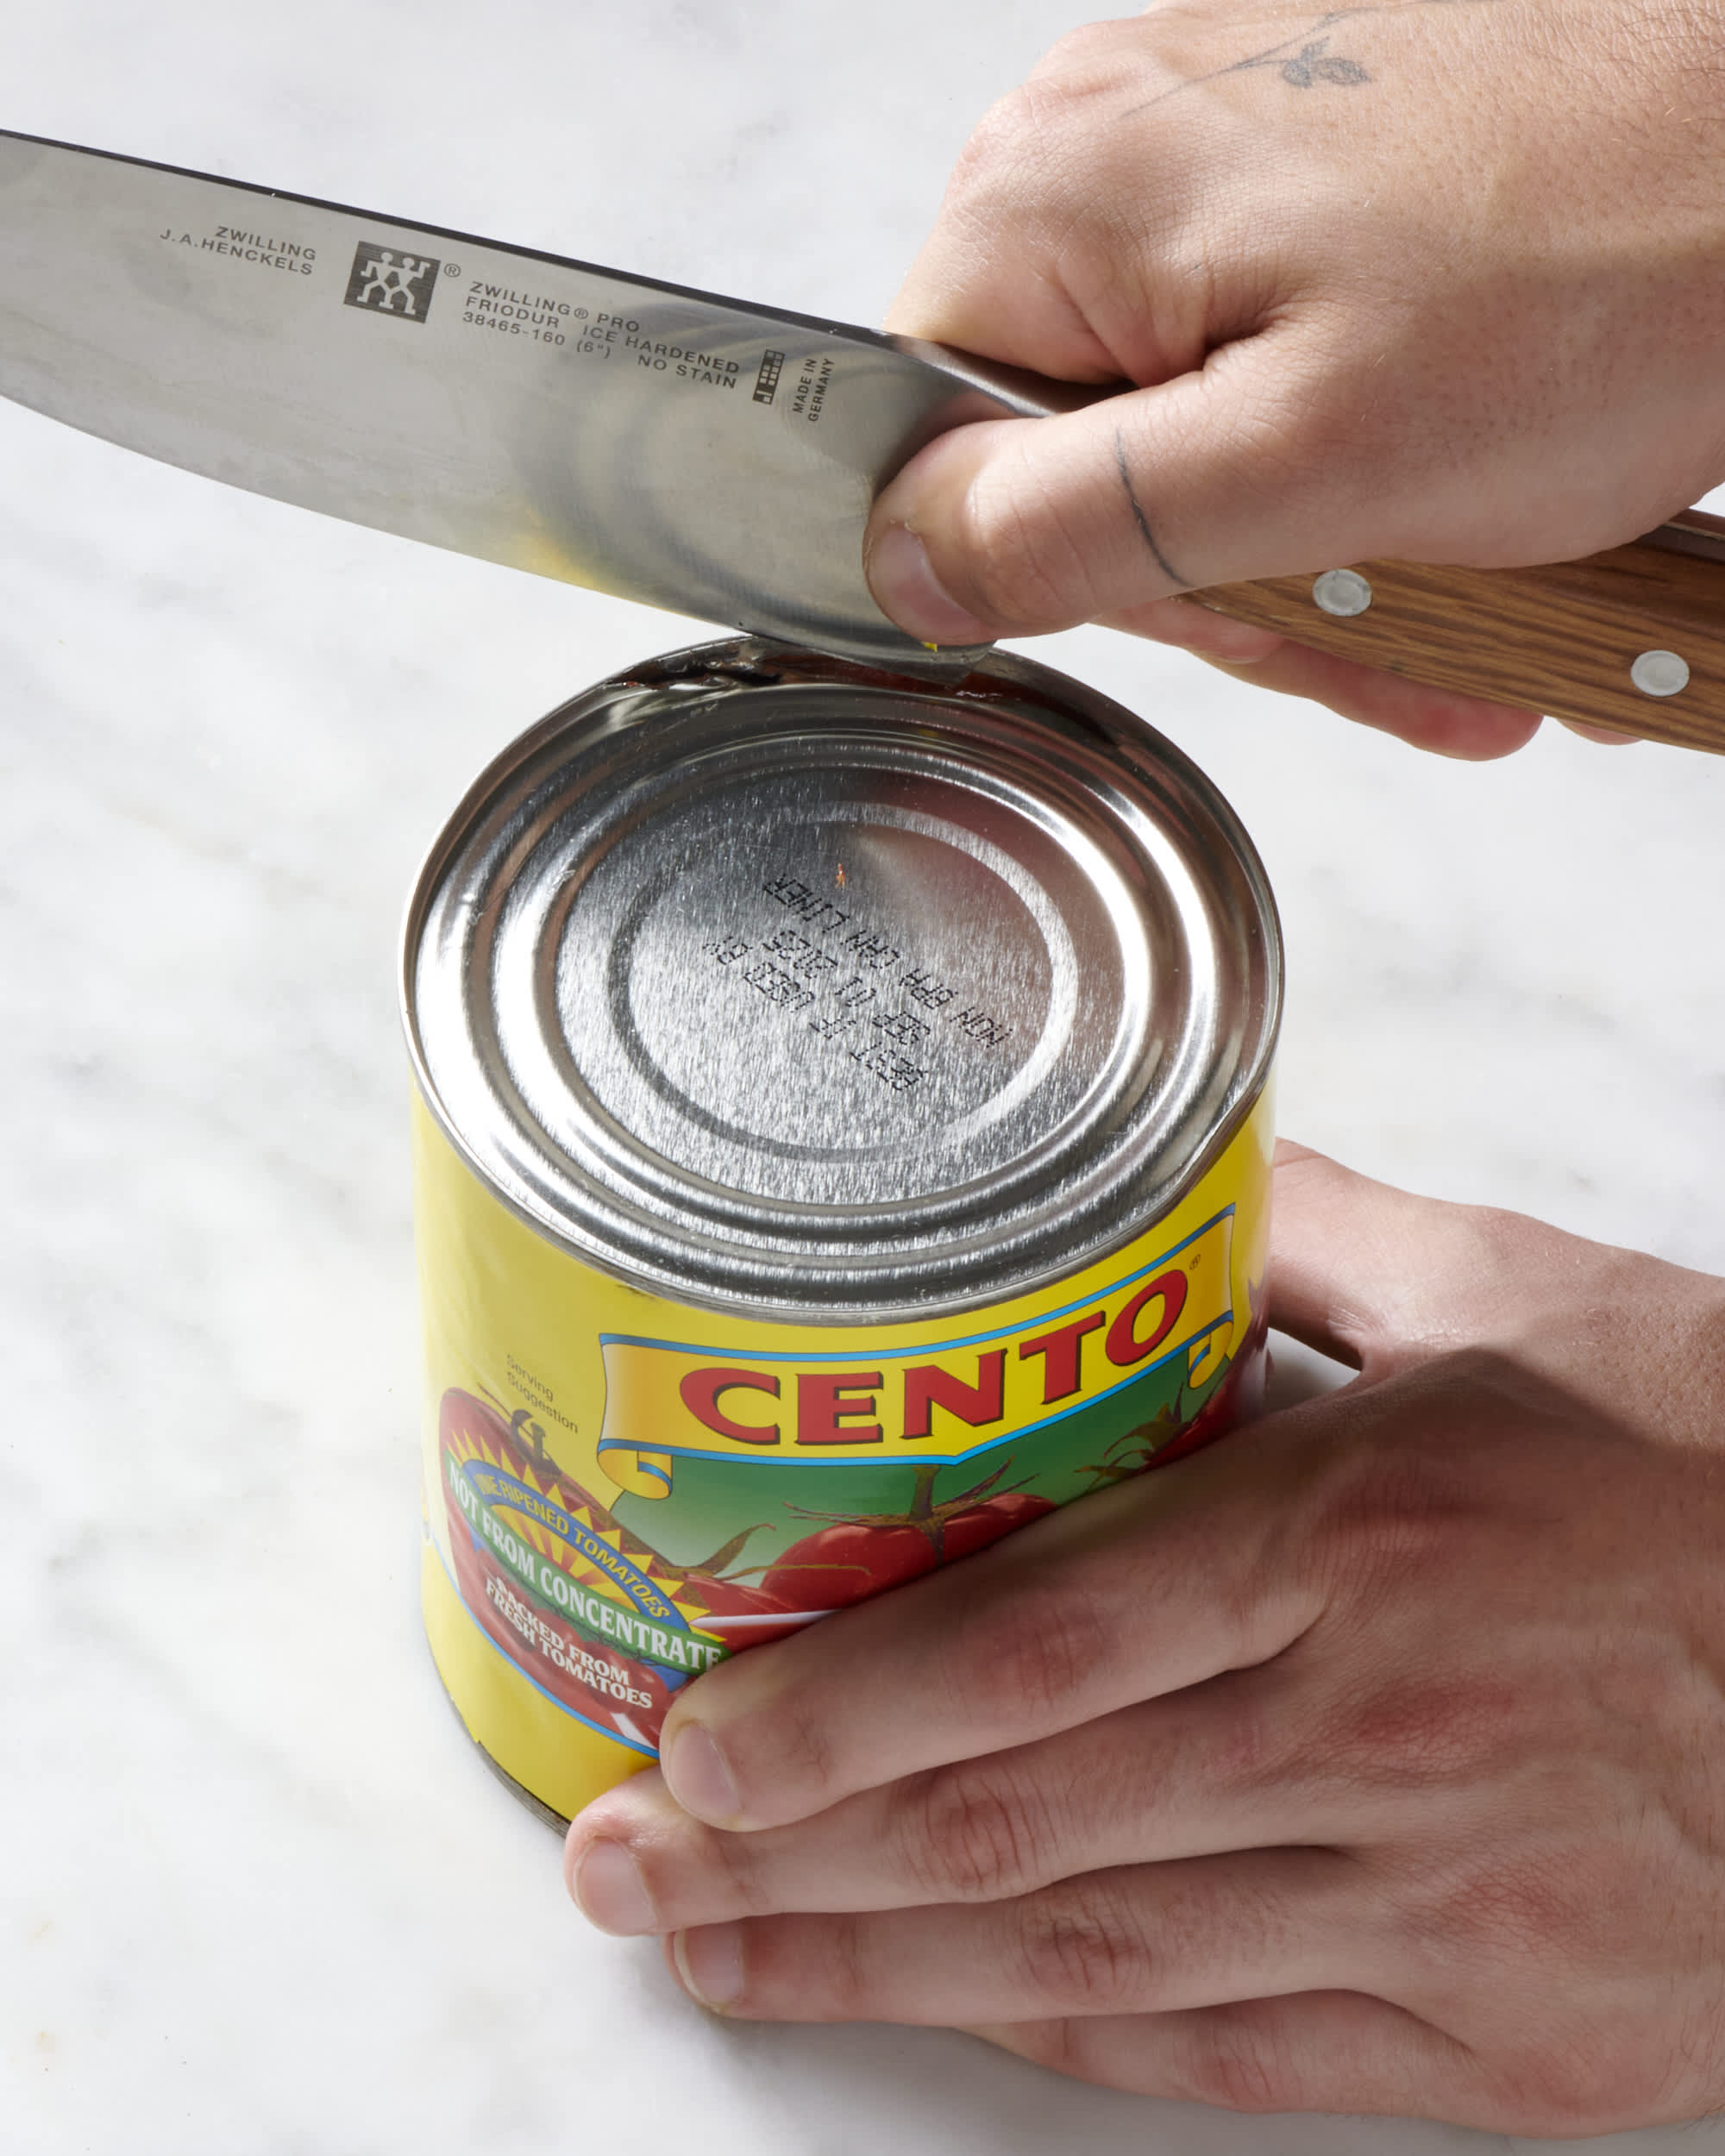 4 Ways to Open Can Without Can Opener